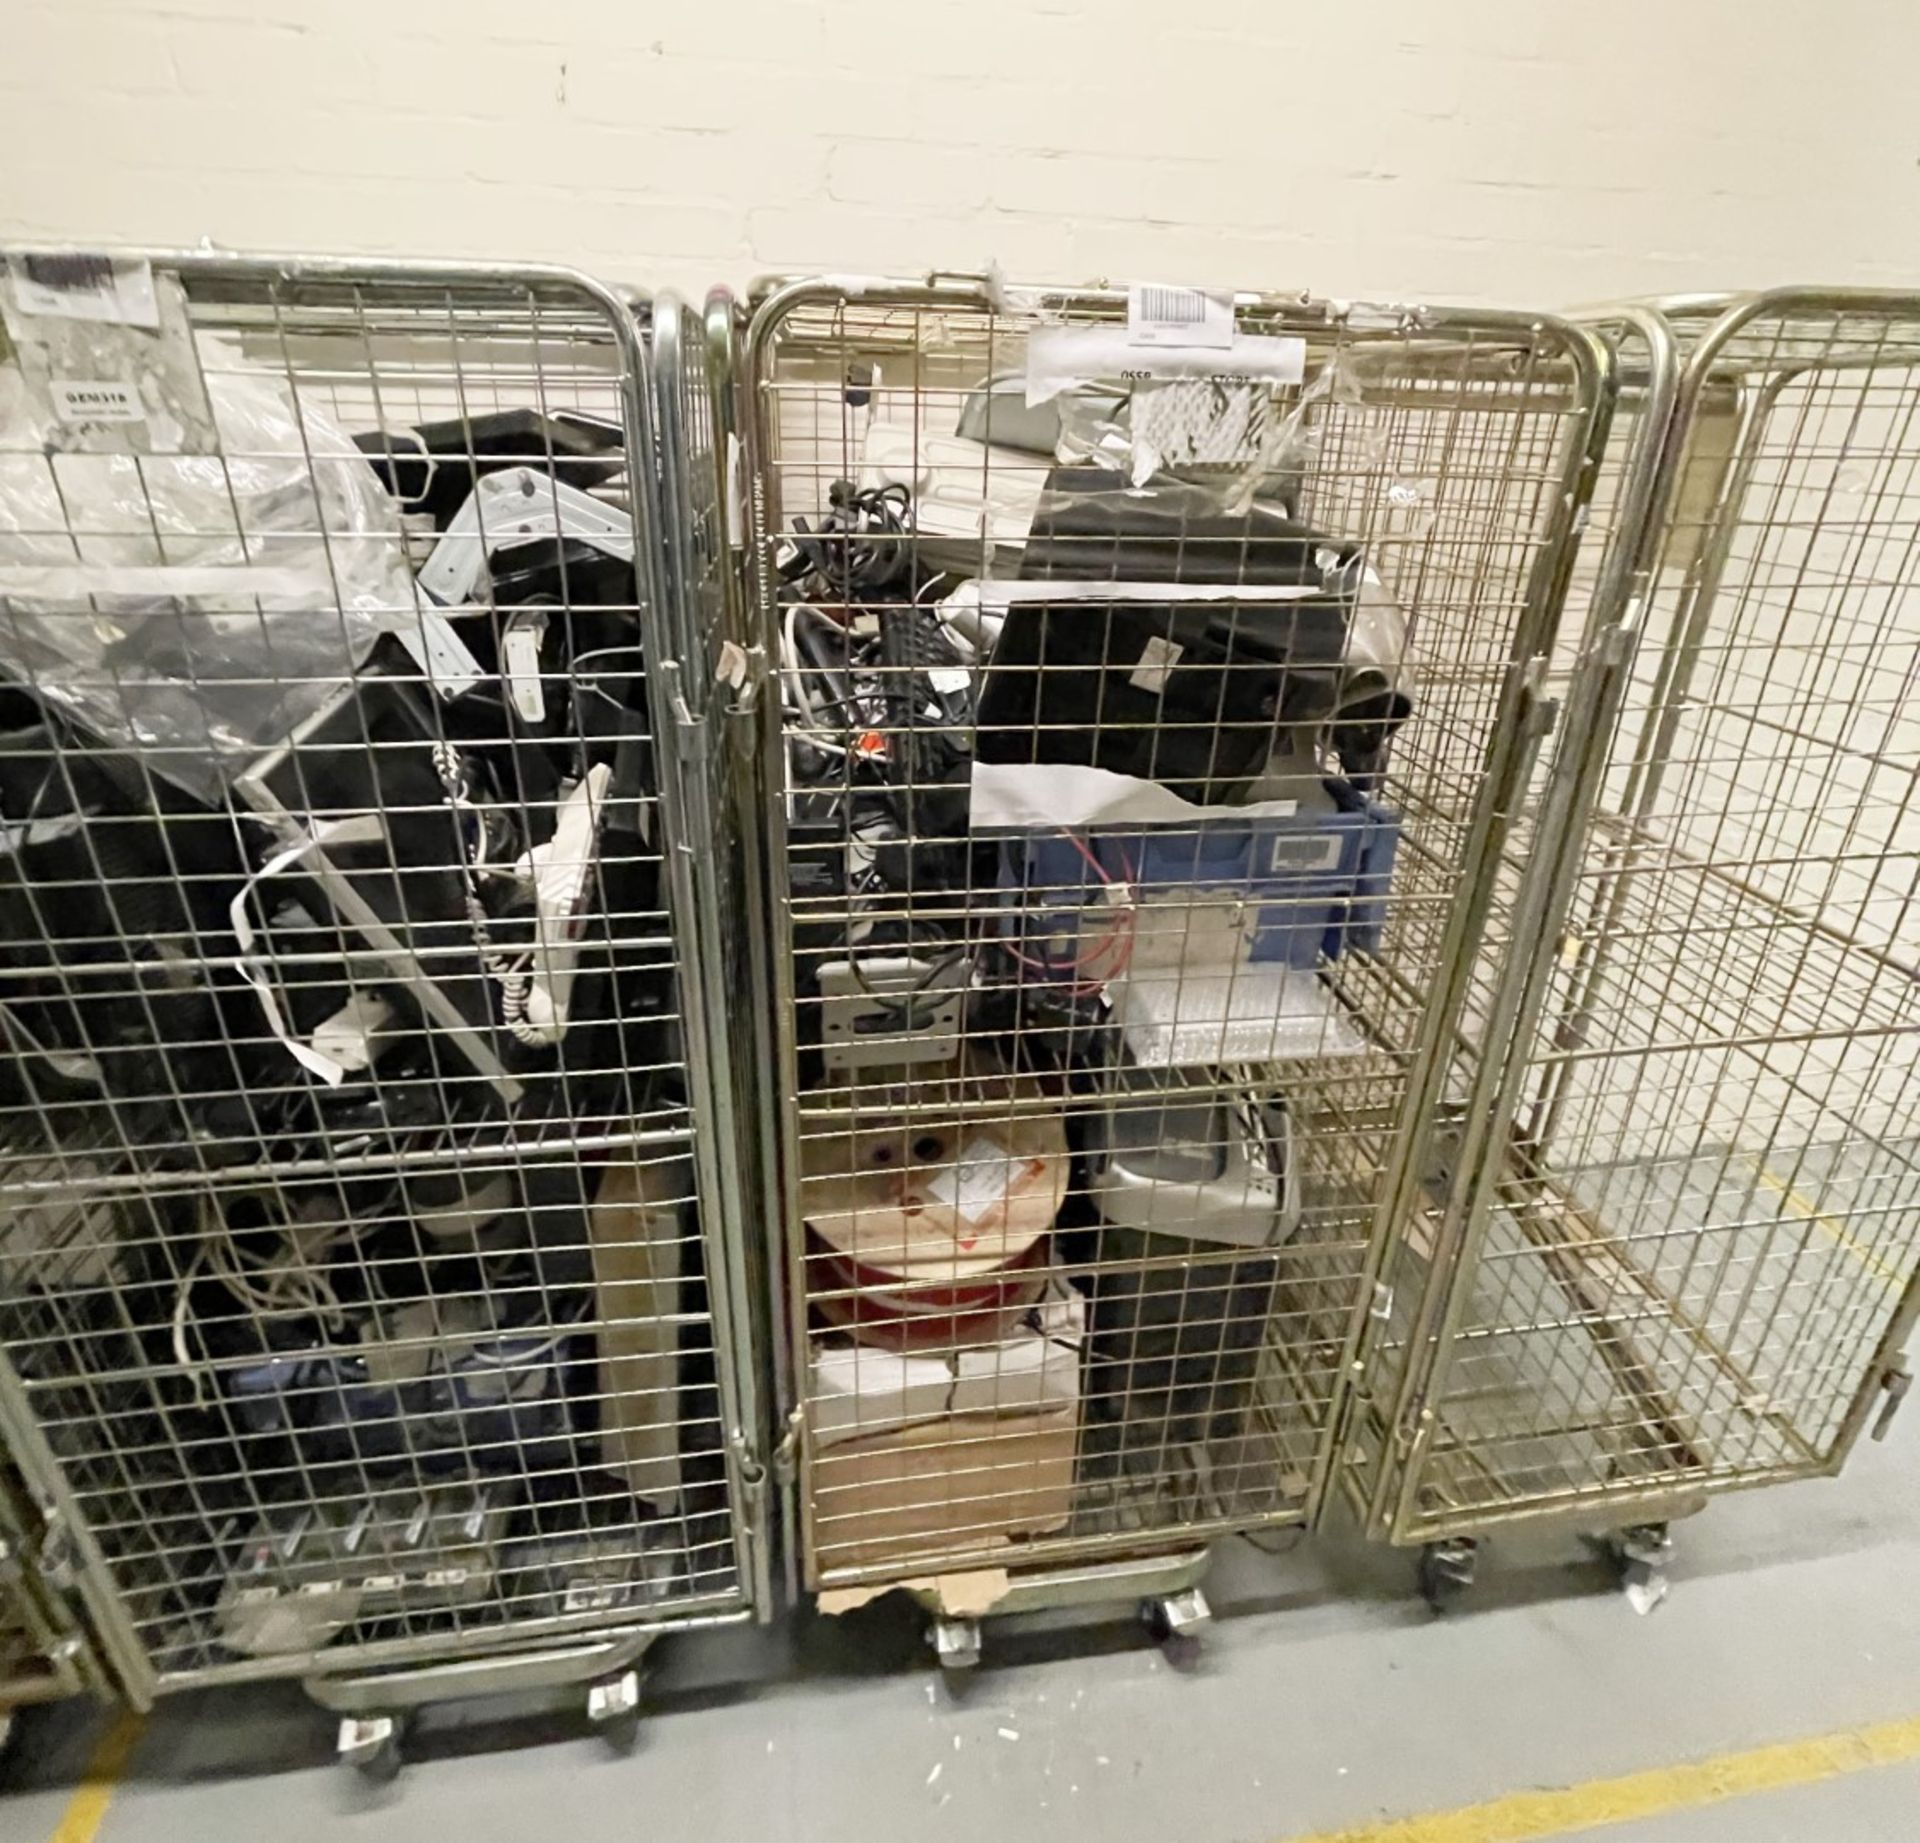 5 x Warehouse Roller Cages With Contents - Contents Include Various Electricals, Office Equipment, - Image 9 of 11